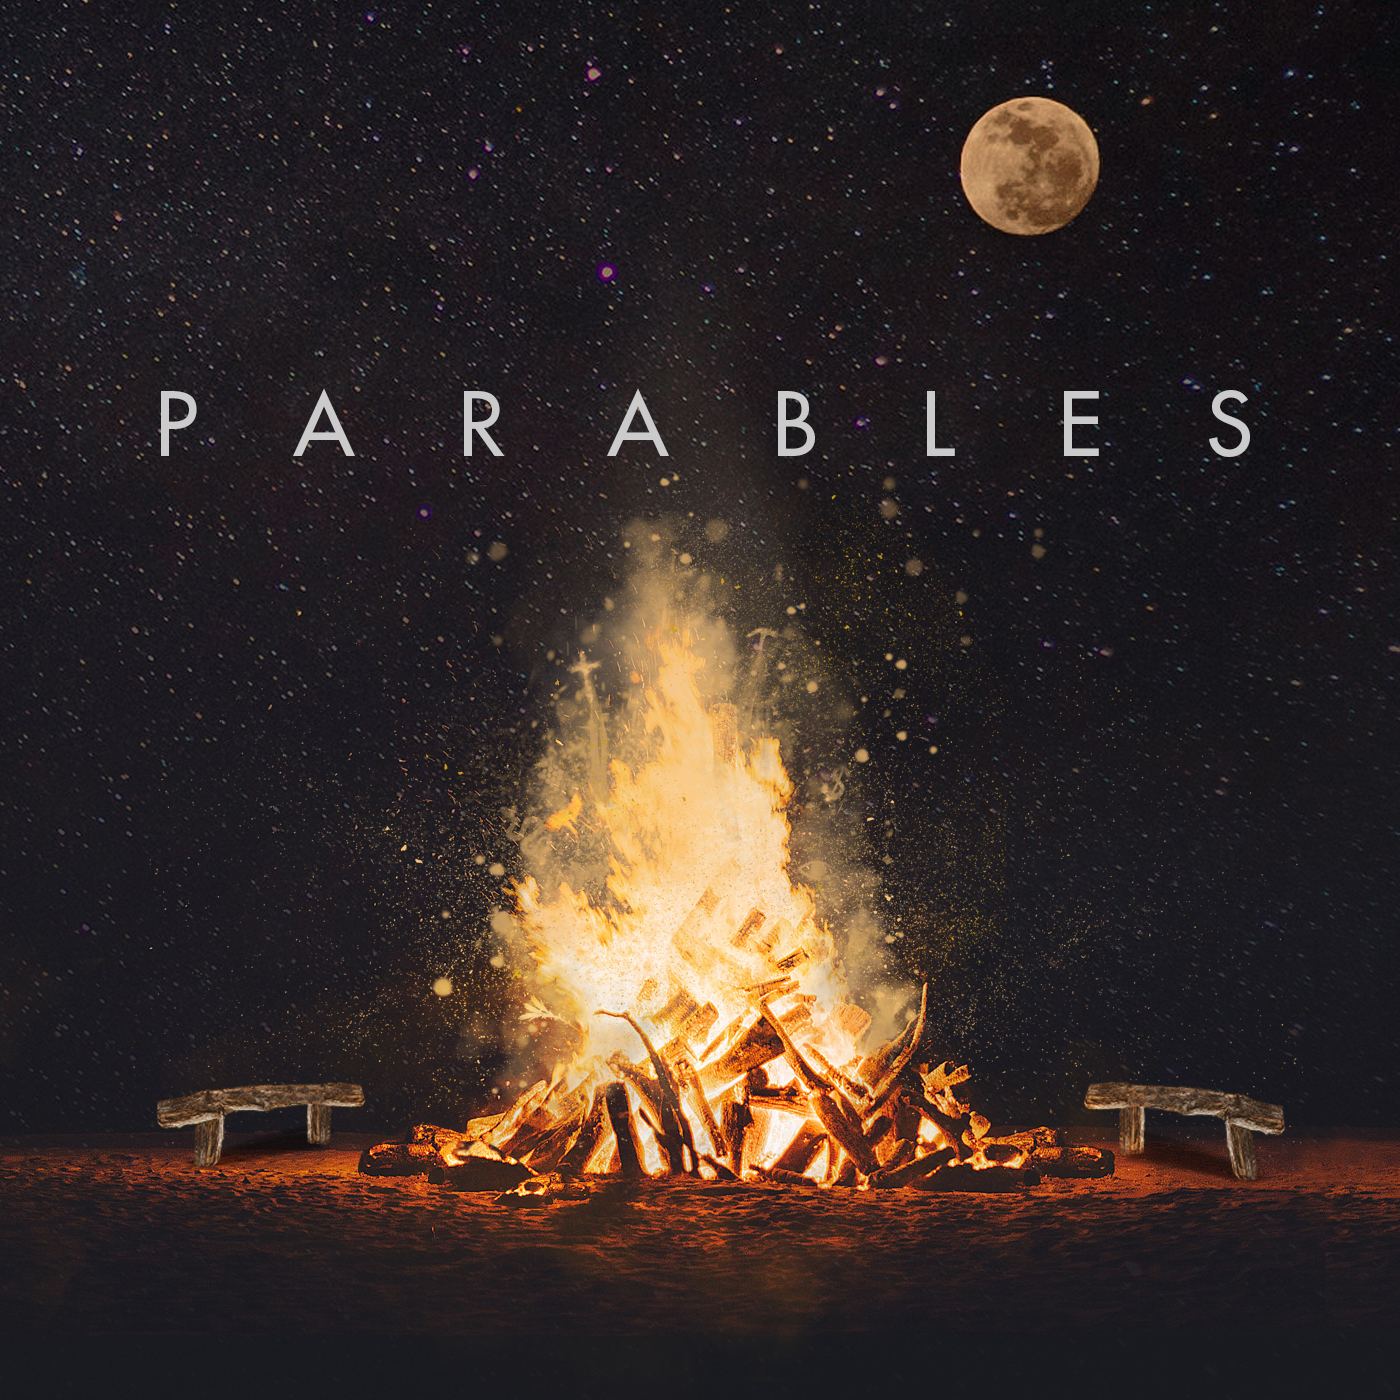 Parables - Watchful Servant - Chris Wall - 10-27-2019